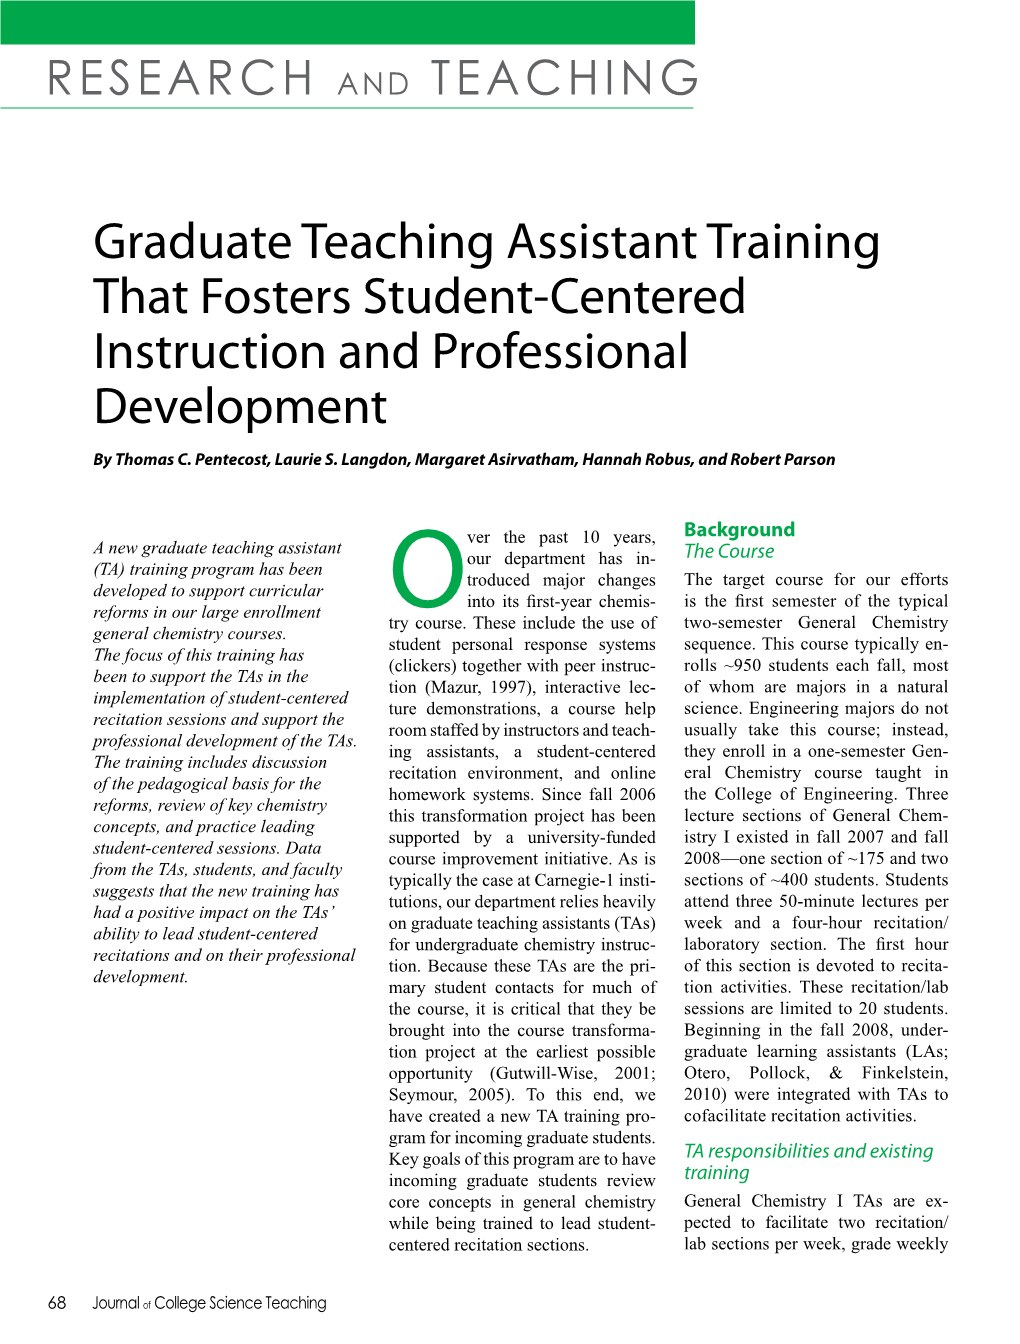 Graduate Teaching Assistant Training That Fosters Student-Centered Instruction and Professional Development by Thomas C